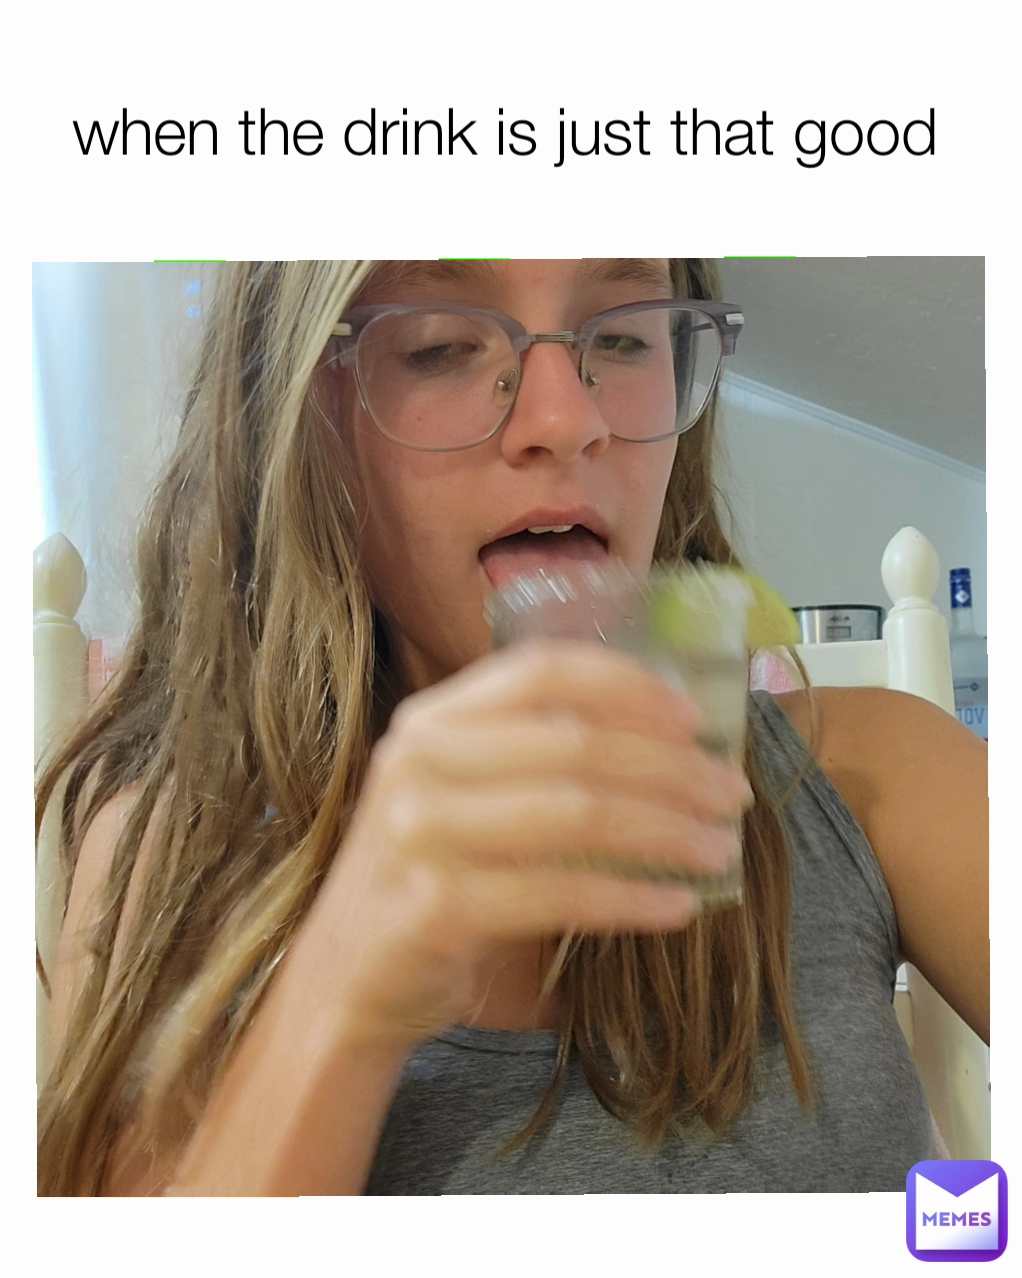 when the drink is just that good